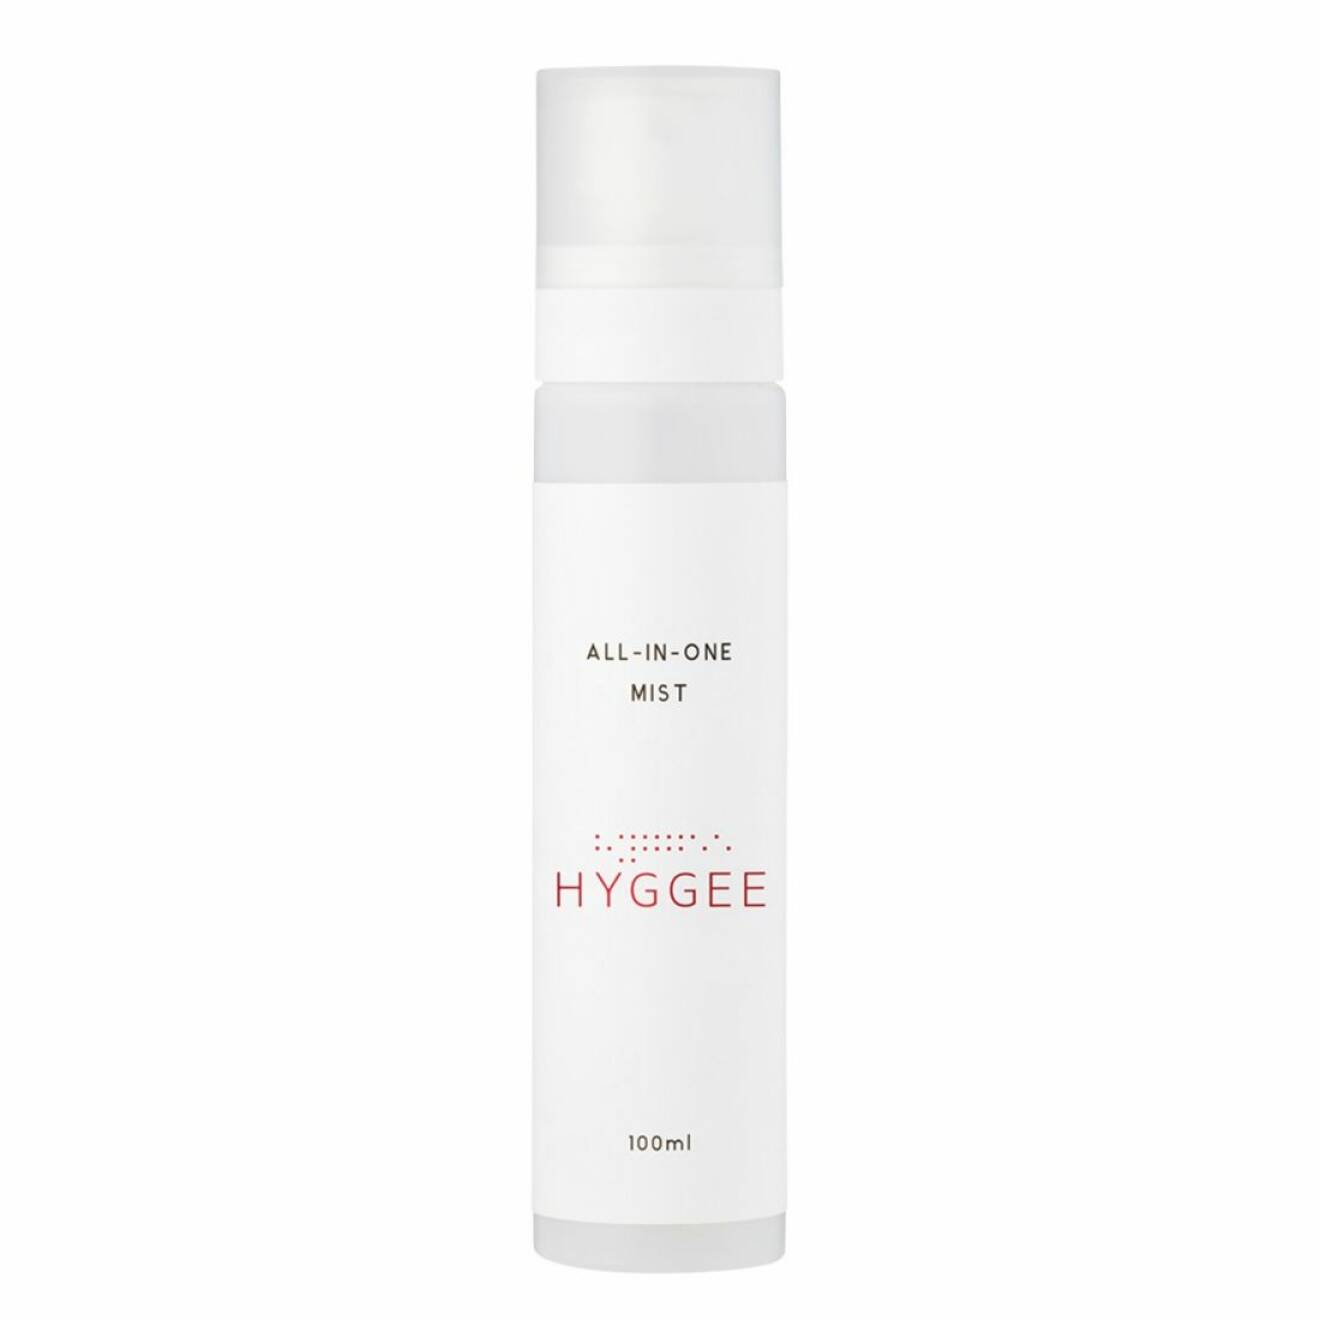 Hyggee All-in-one-mist